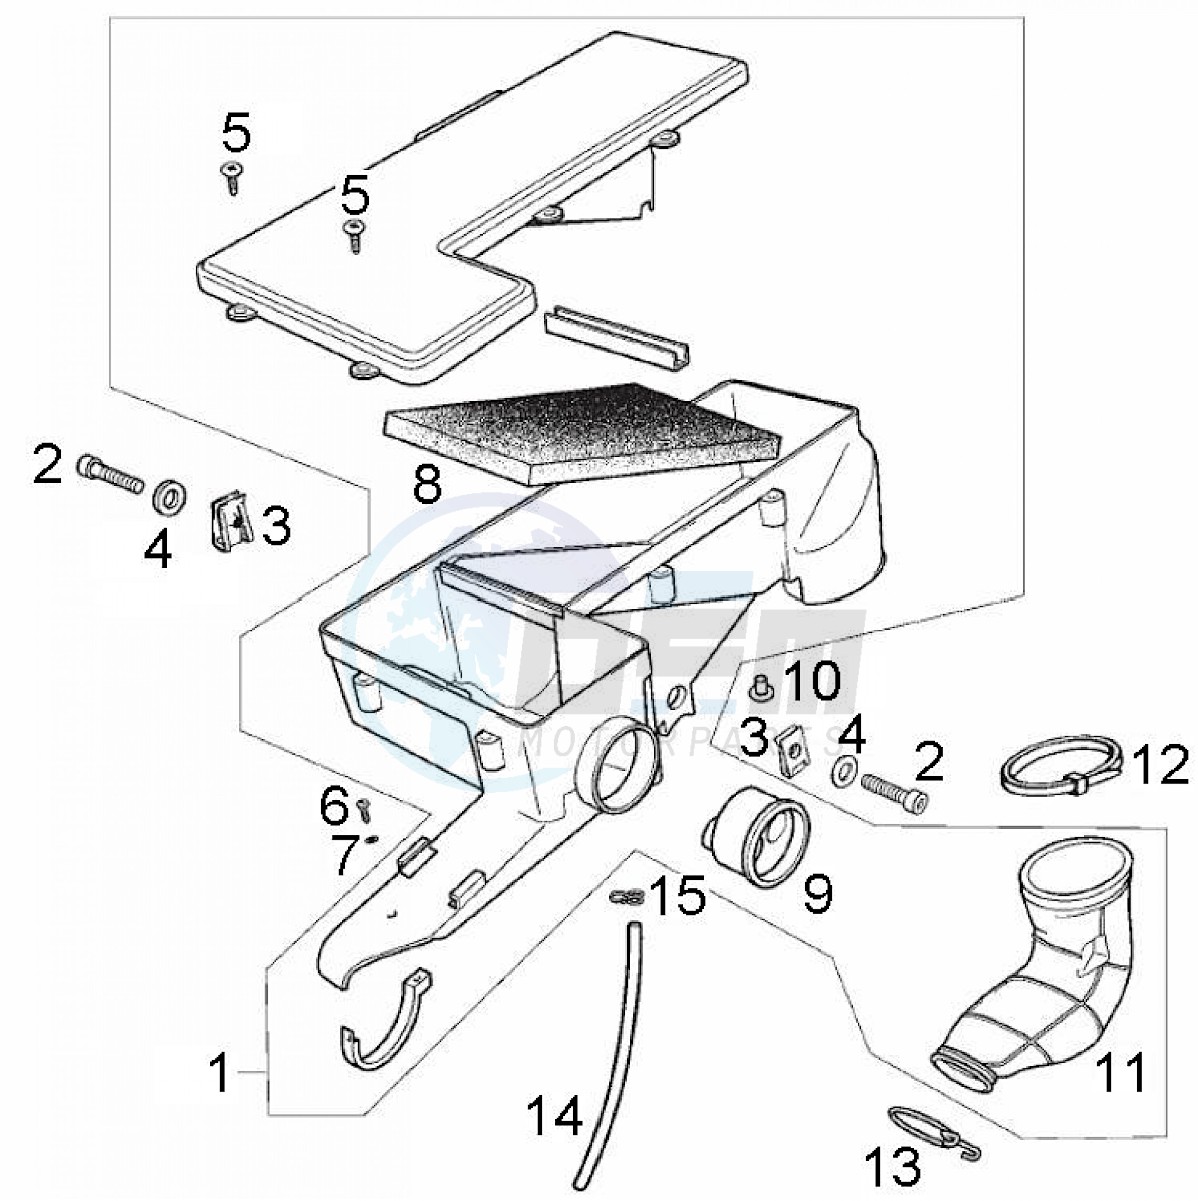 Air box (Positions) image